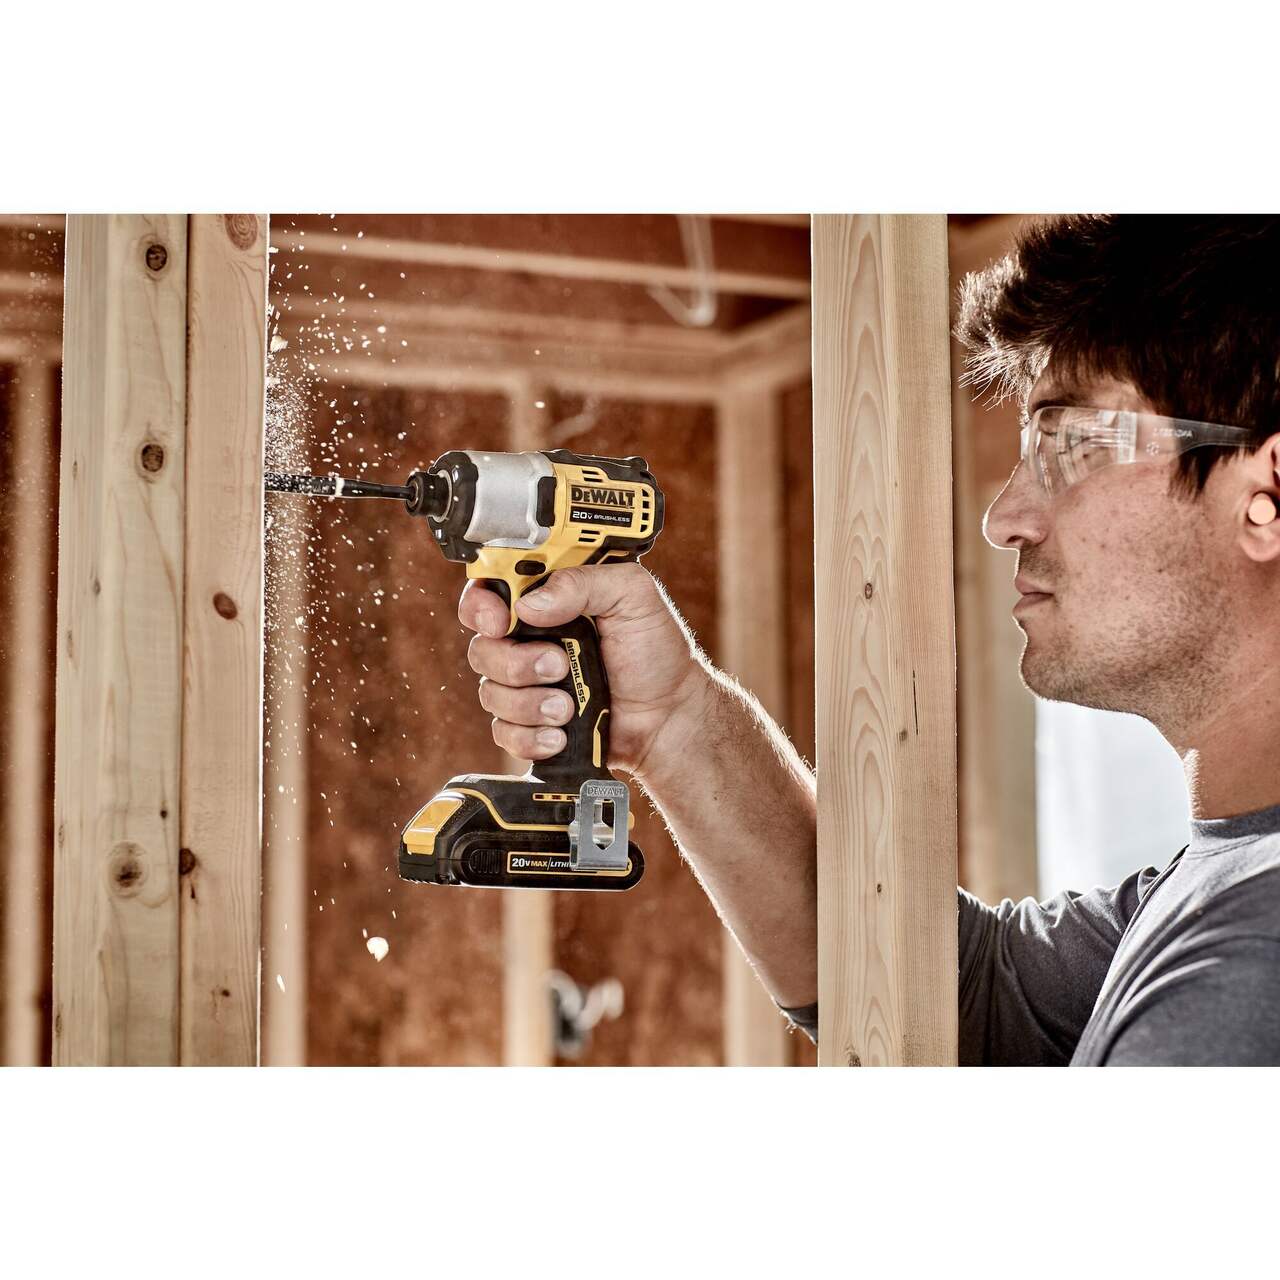 DEWALT DCK228D2 20V MAX Brushless Compact Cordless 1/2-in Hammer Drill & 1/4-in  Impact Driver Kit